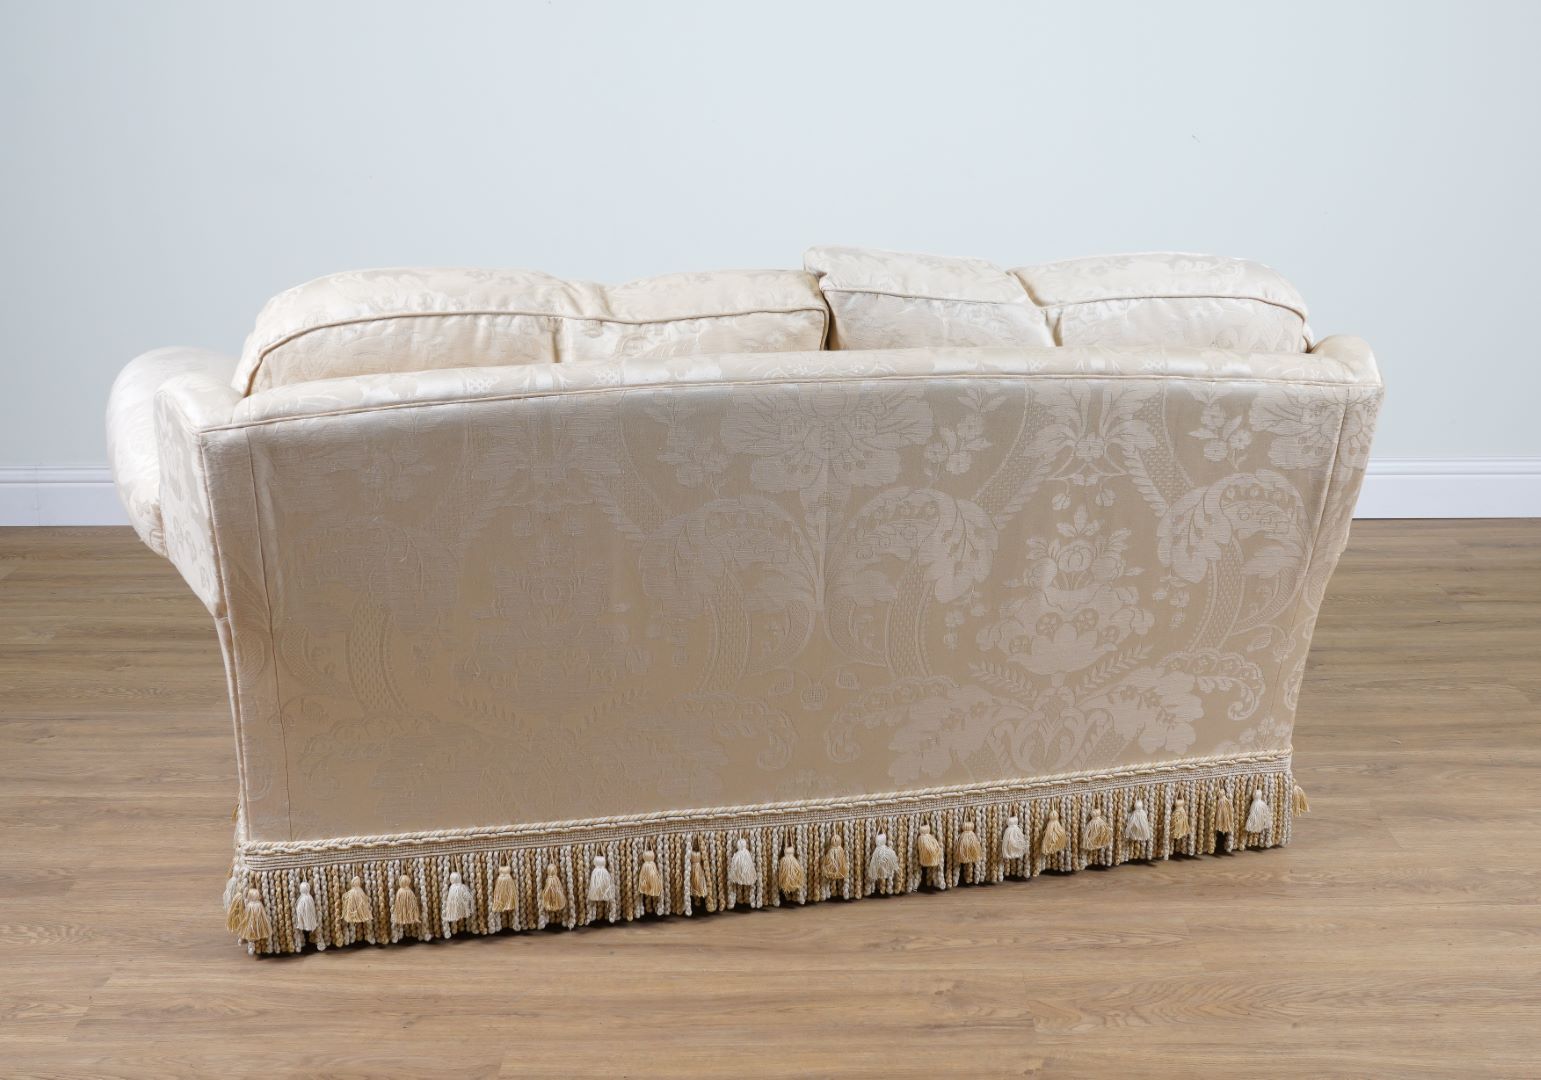 A MODERN TWO SEAT SOFA IN FLORAL GOLD PATTERN UPHOLSTERY - Image 2 of 2